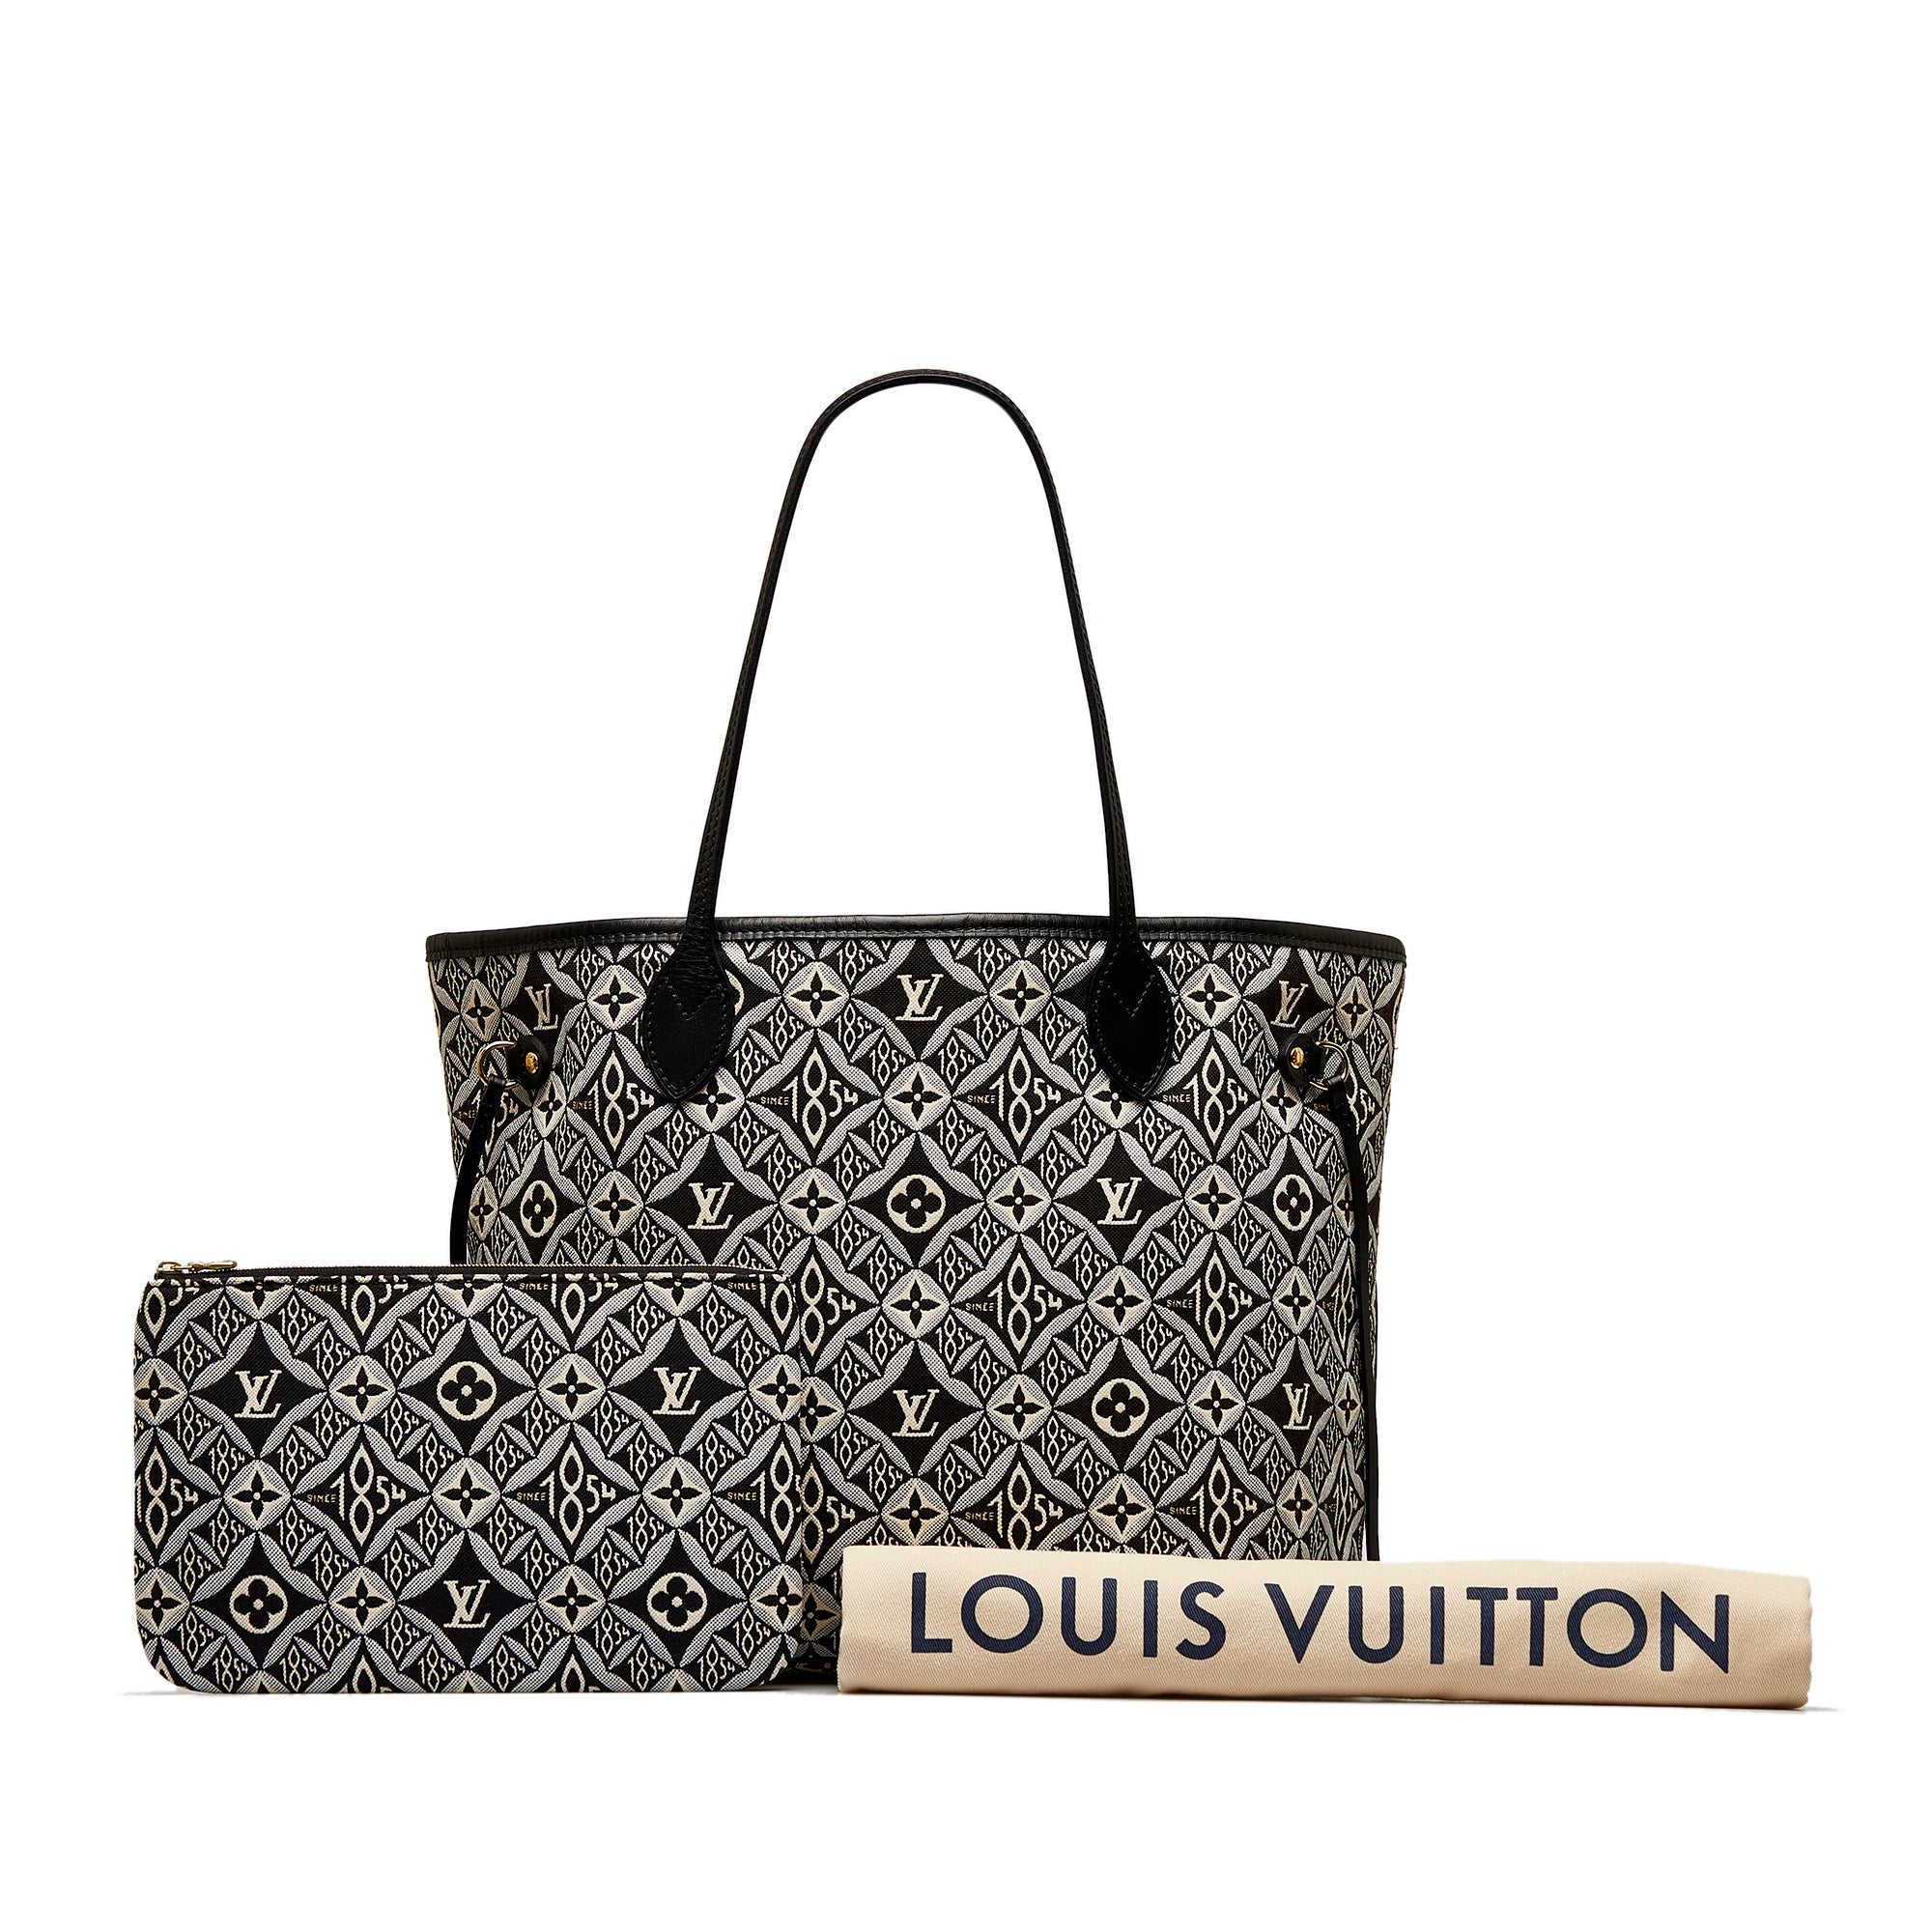 Louis Vuitton Special Edition Since 1854 Neverfull mm Shoulder Bag